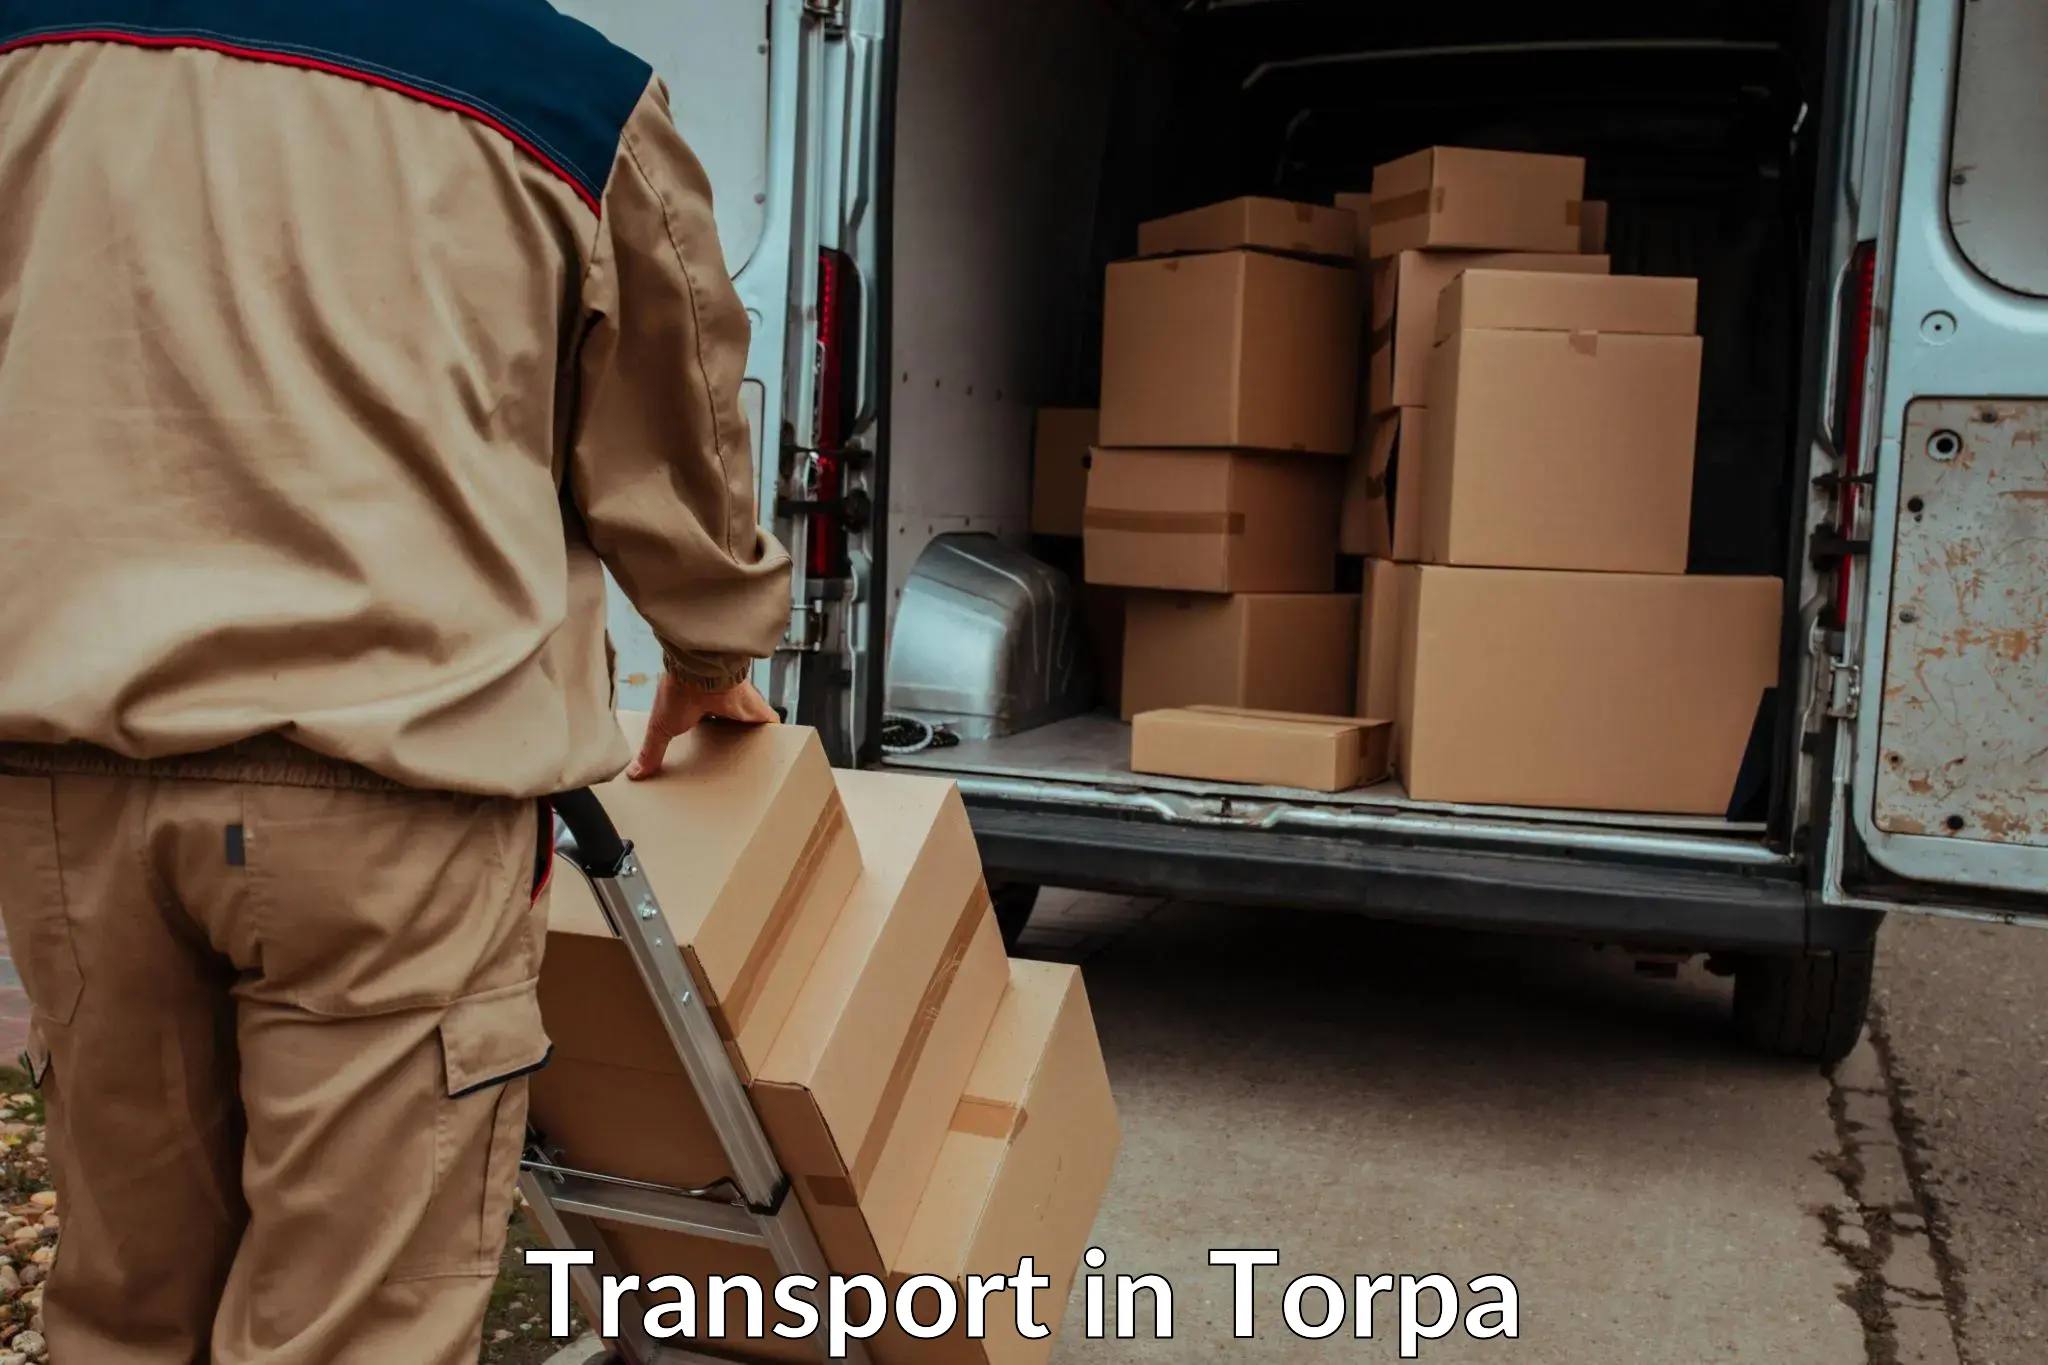 Air cargo transport services in Torpa